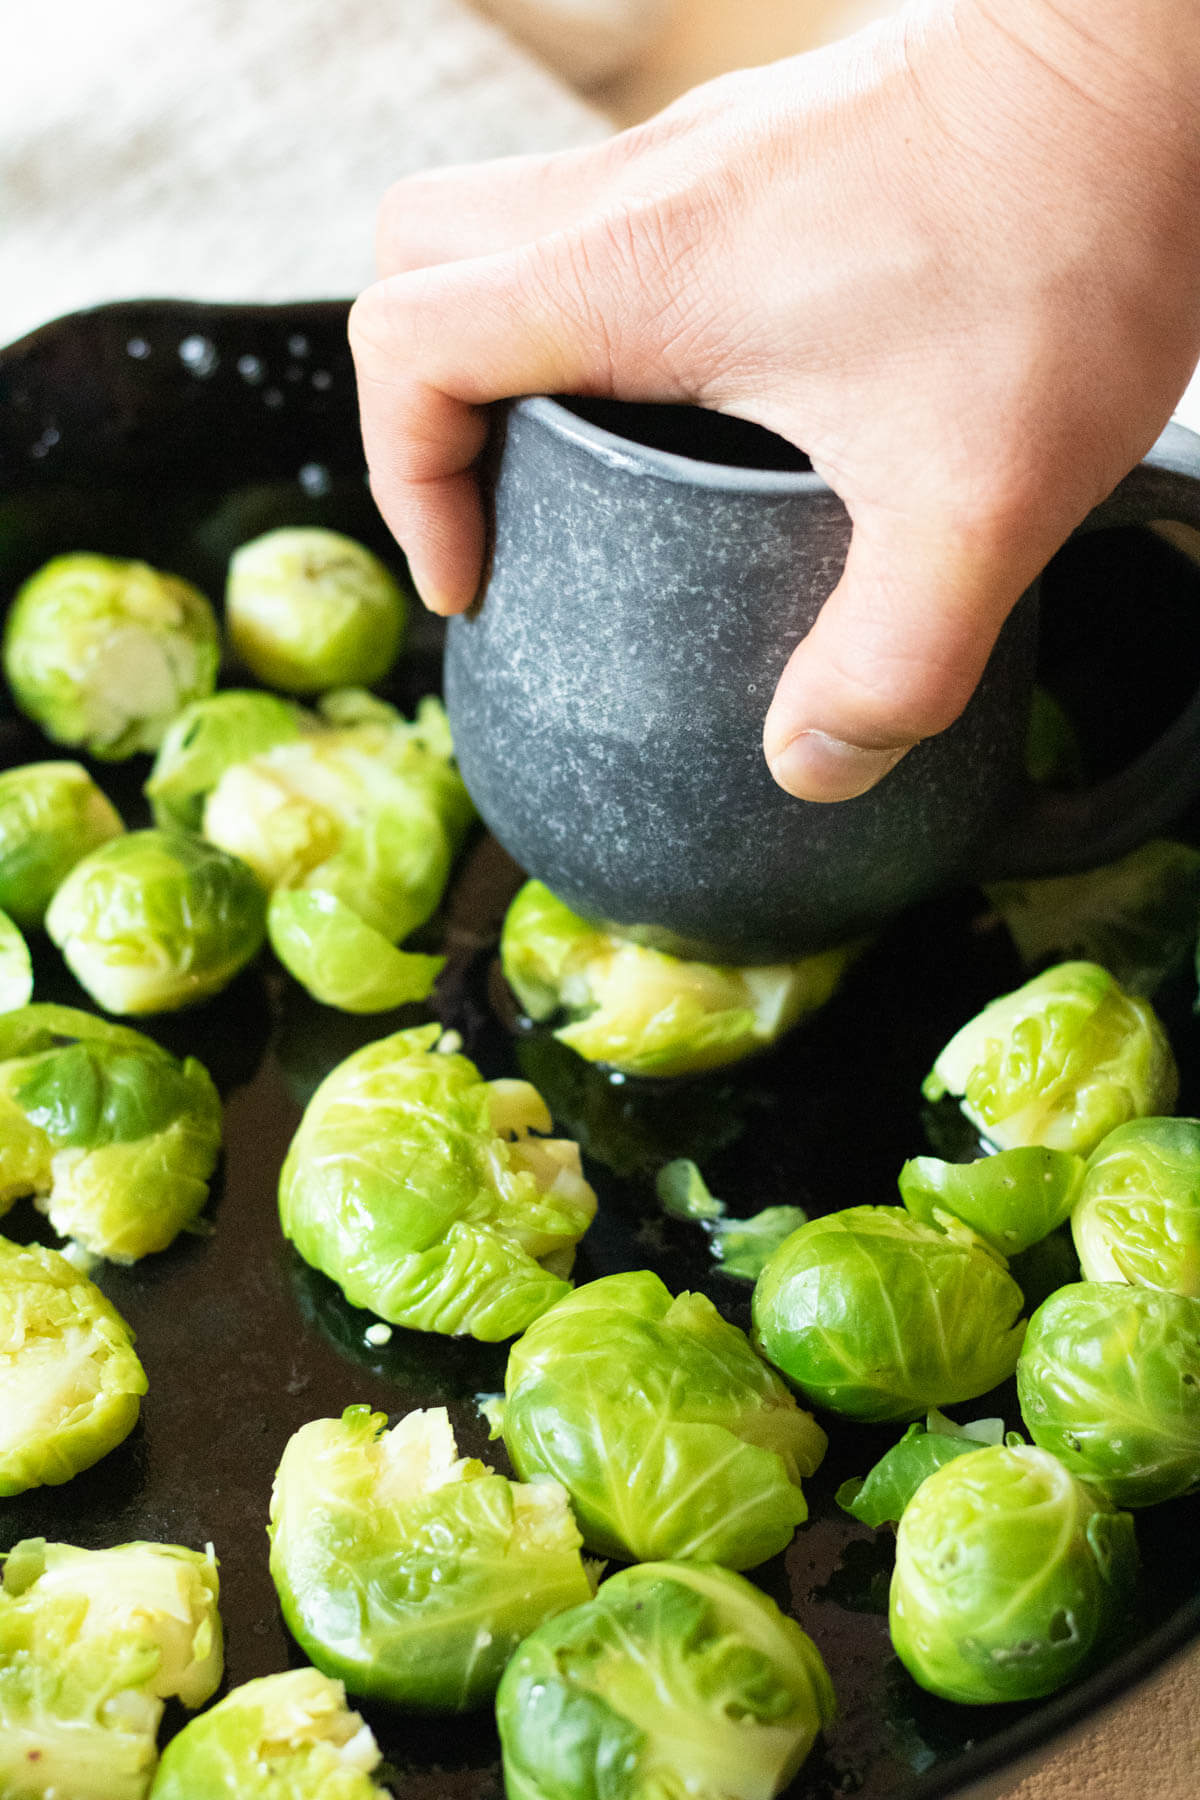 smashing a brussels sprout with a heavy ceramic mug